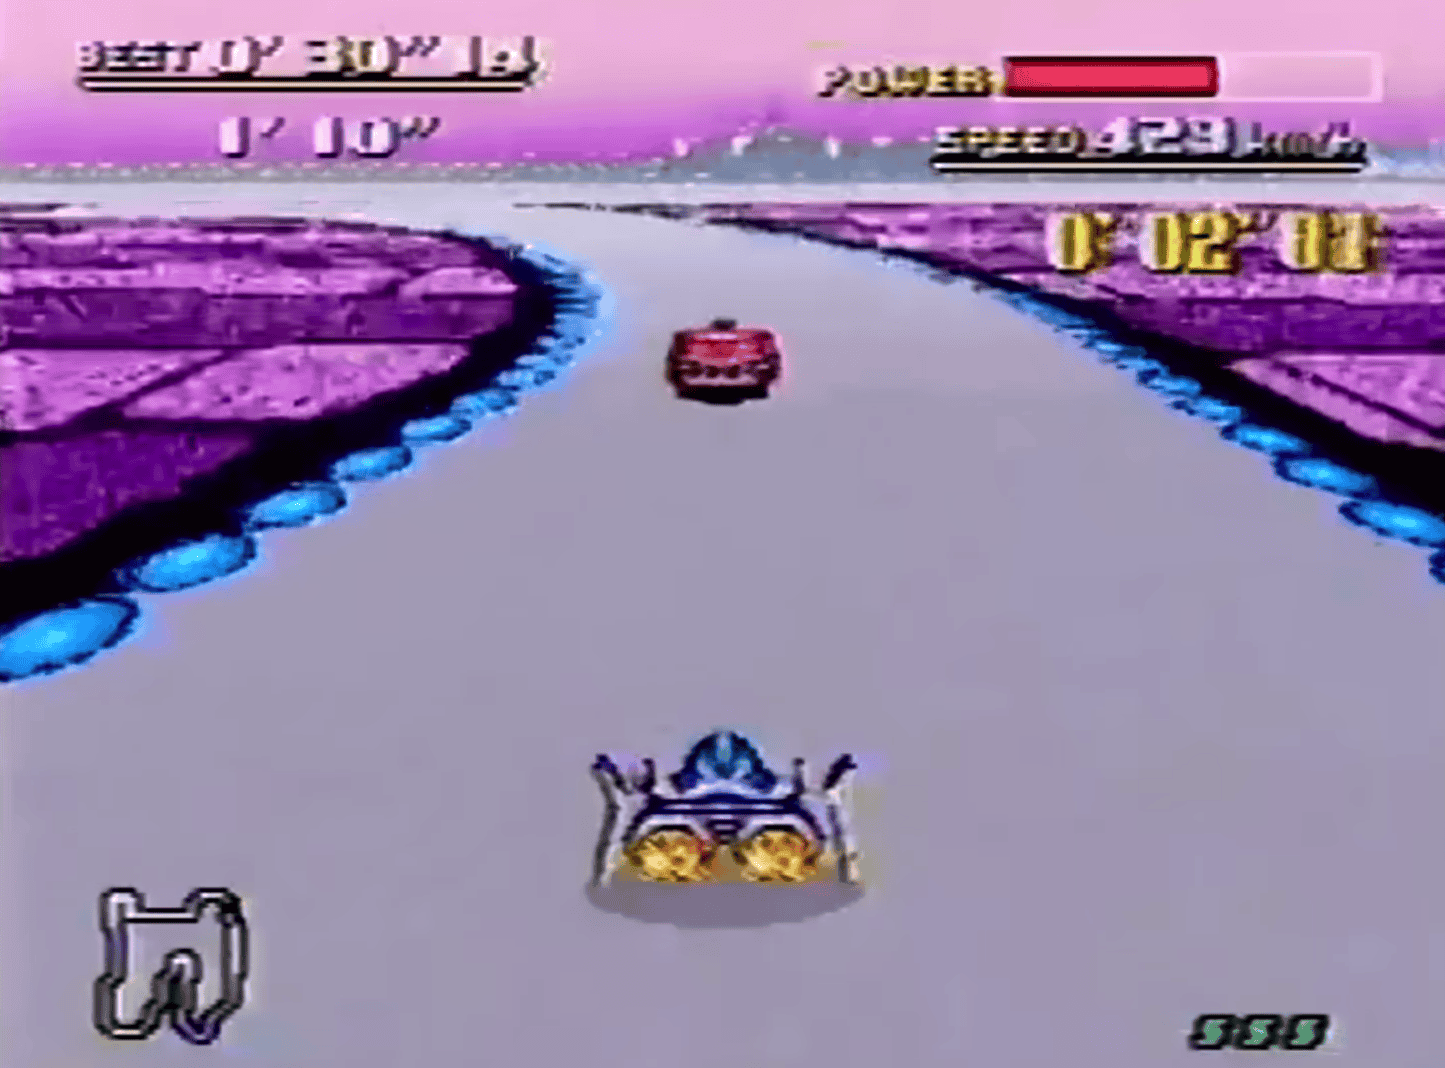 Two Lost F-ZERO Games have been recreated using an old VHS